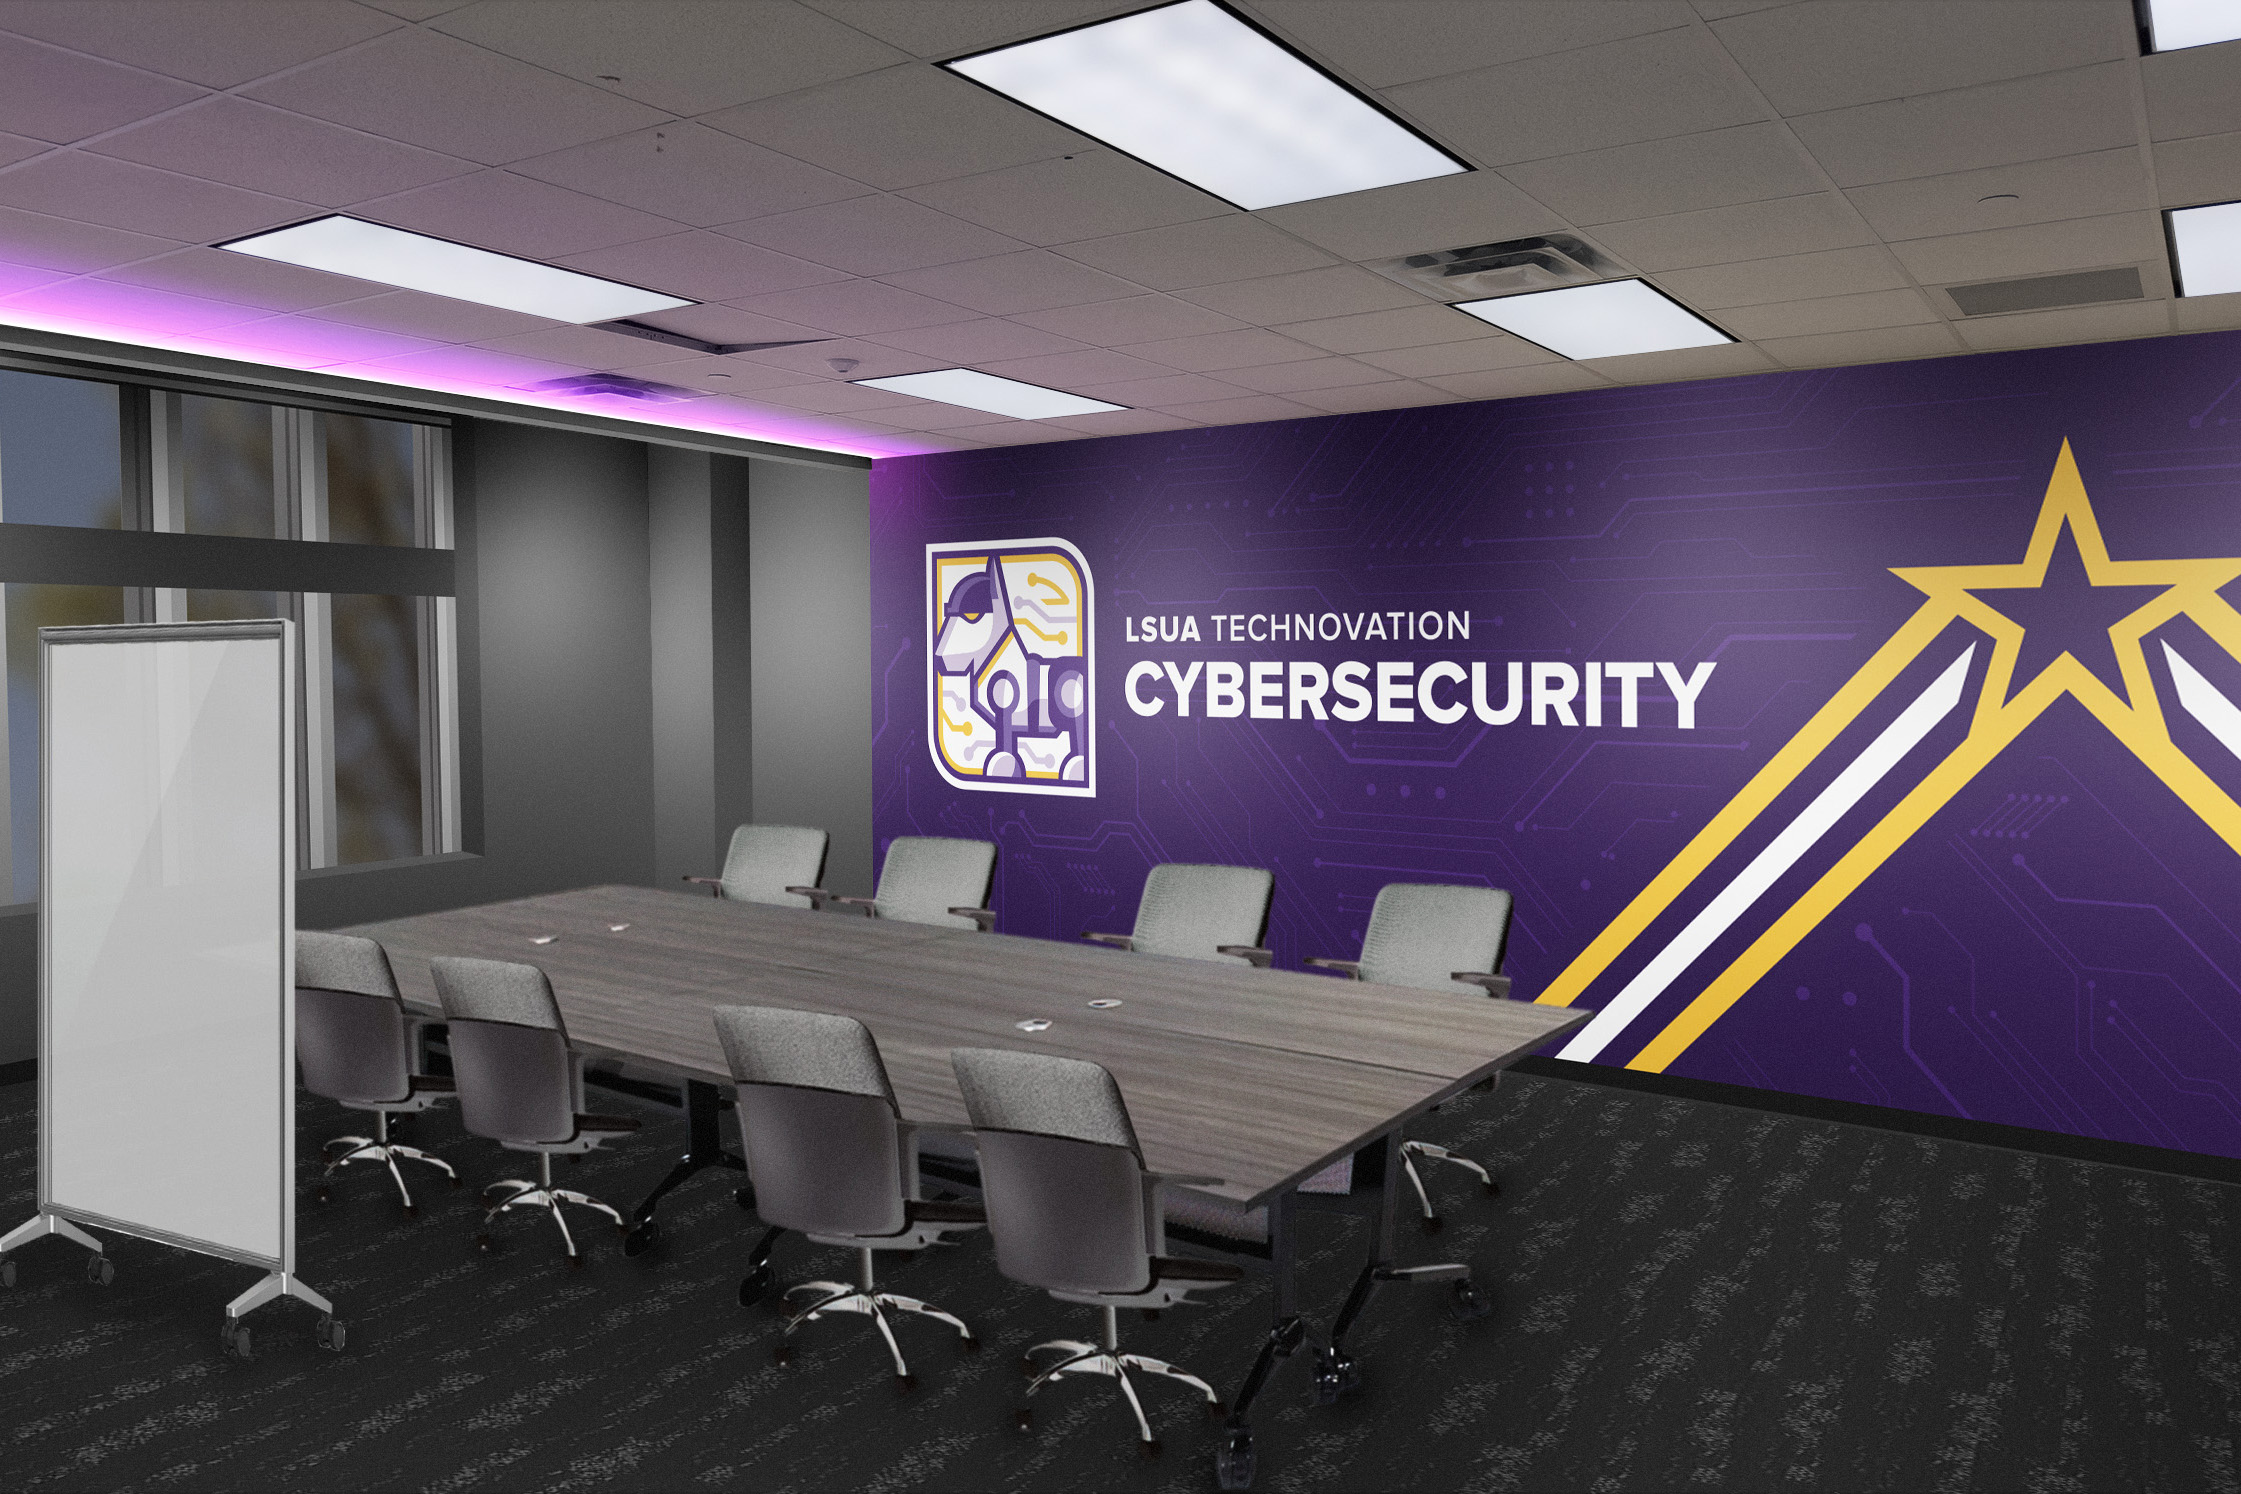 With support from Louisiana Economic Development, LSU Alexandria is building out its Technovation Center and a cyber lab for hands-on training.